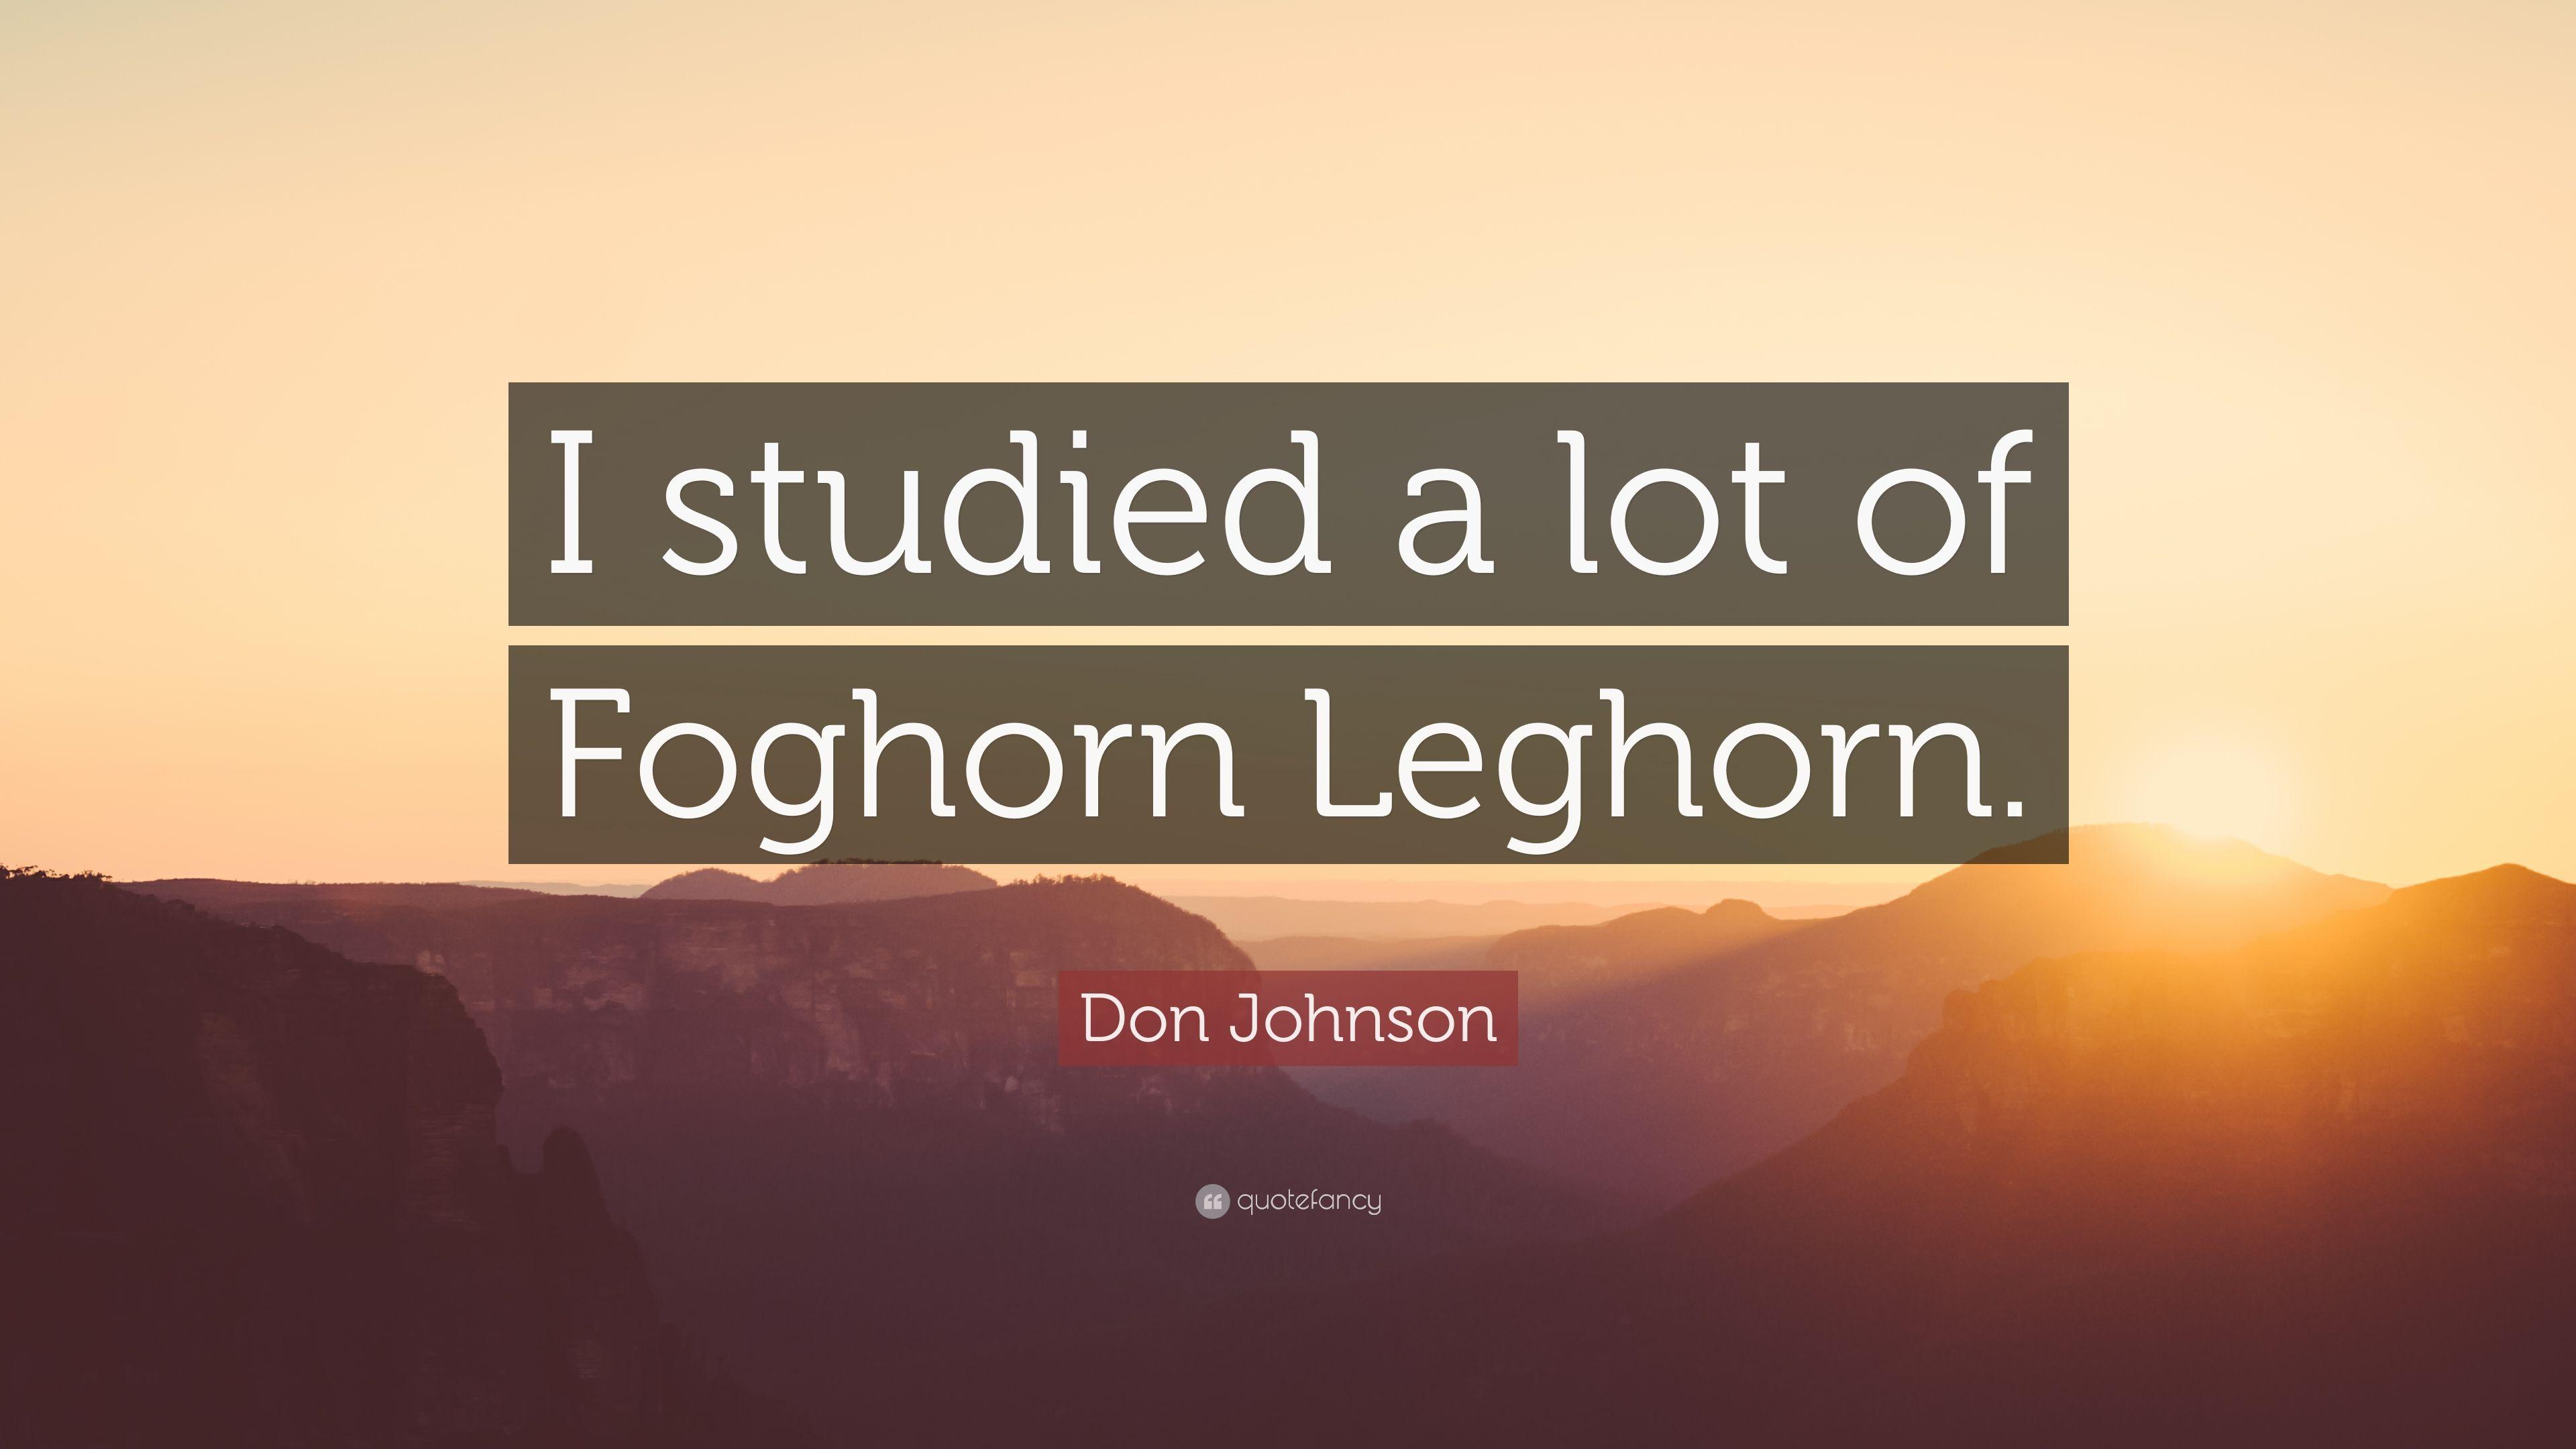 Don Johnson Quote: "I studied a lot of Foghorn Leghorn. 